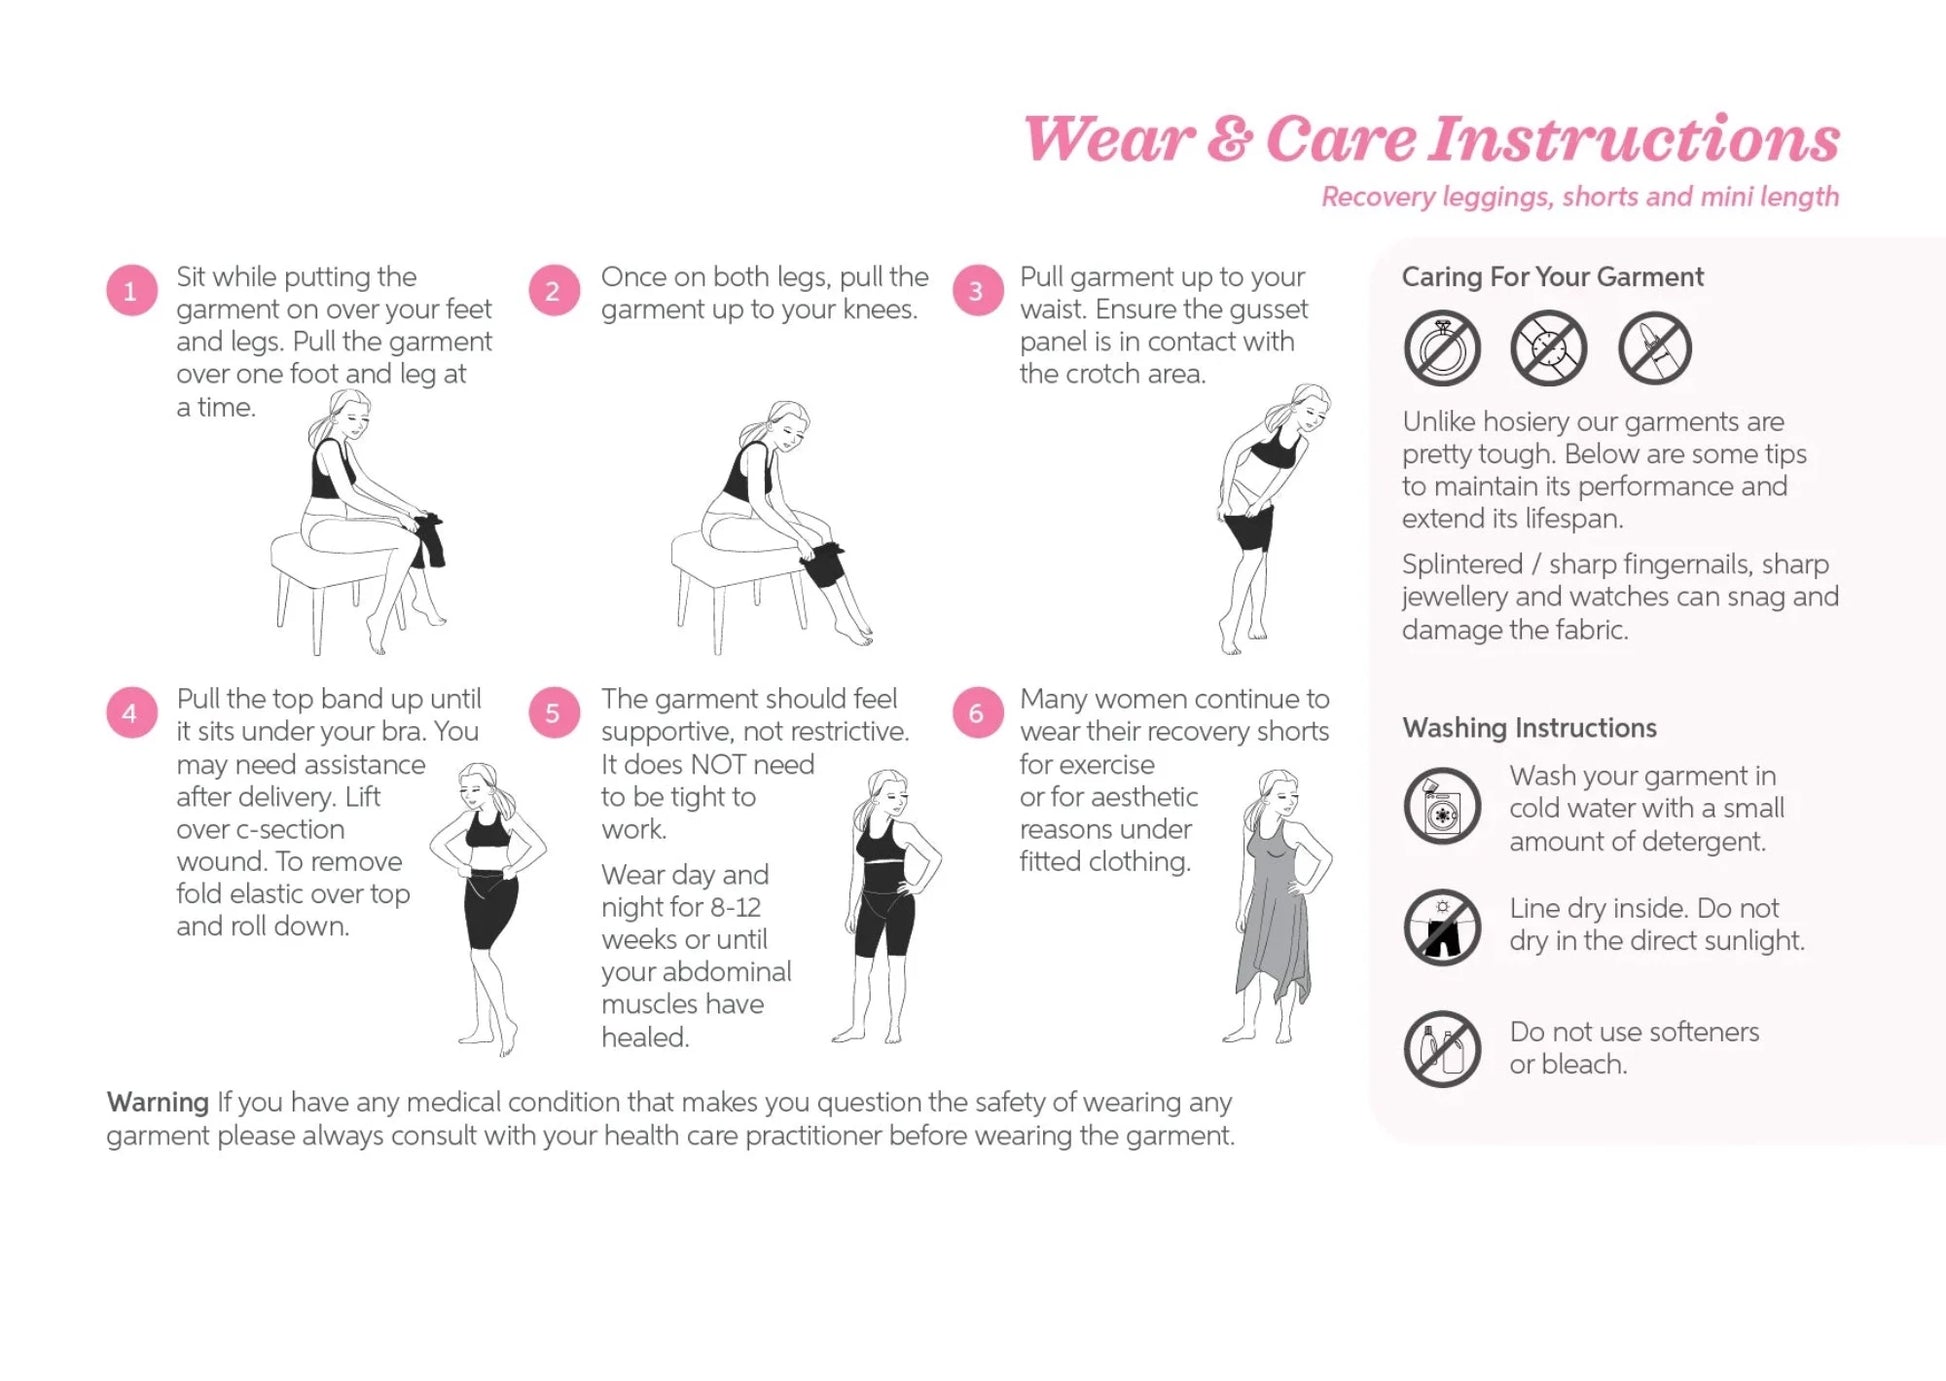 SRCPregnancyRecoveryShorts - Ware & Care Instructions